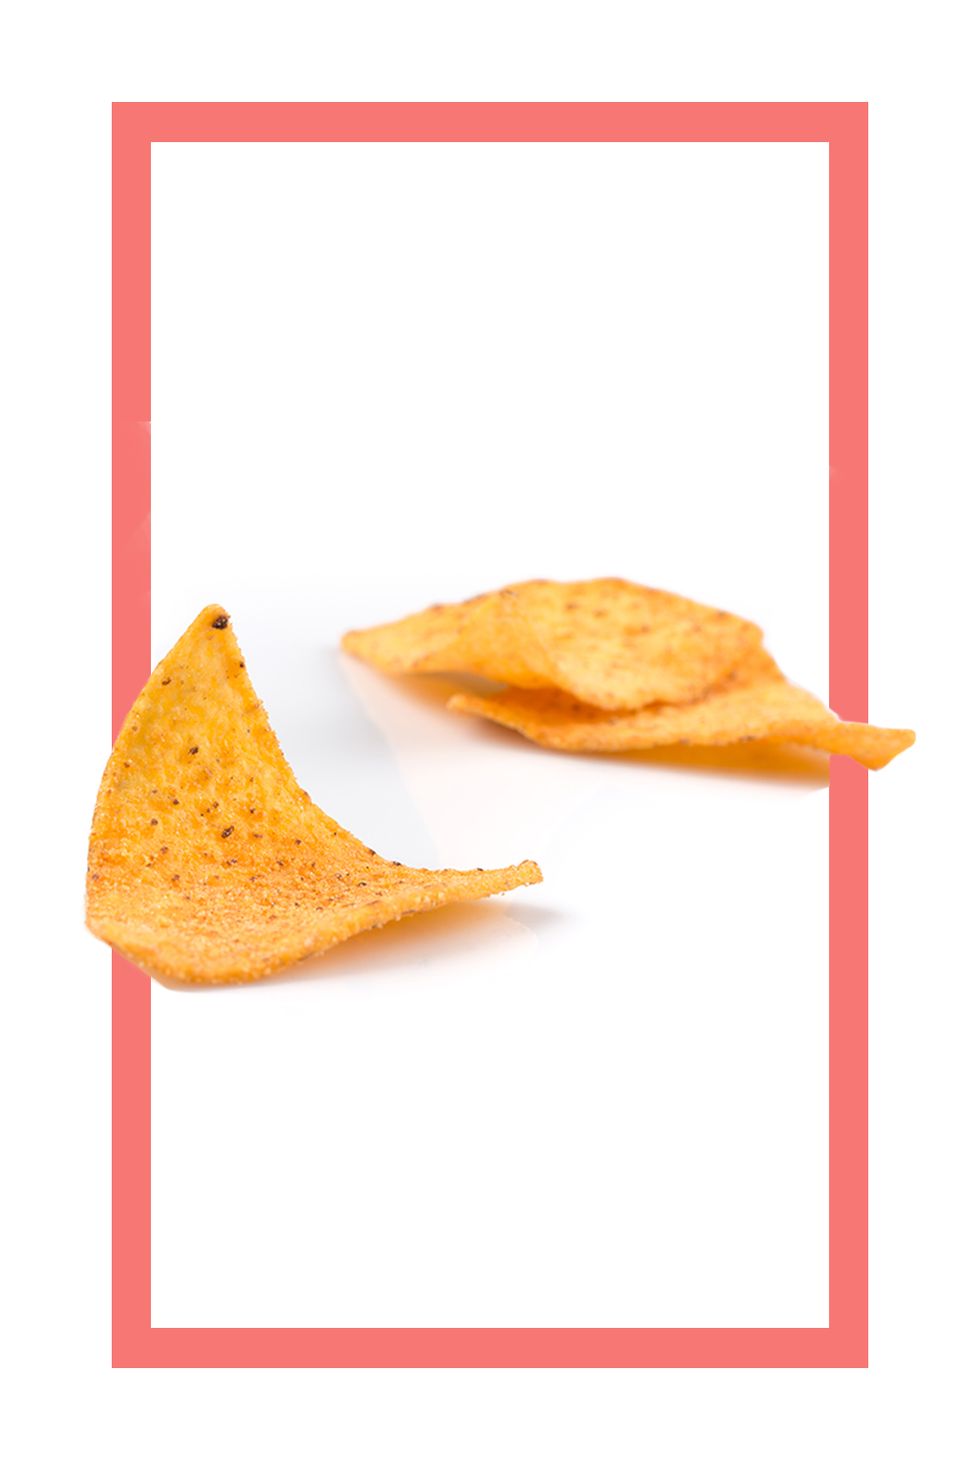 <p>What Doritos have got going for them: relatively low-cal and low-sodium (haha—only in this bracket, amirite?), airy, and pre-portion-controlled unless your local 7-Eleven&nbsp;stocks family-size bags, in which case you are plumb out of luck.&nbsp;</p>